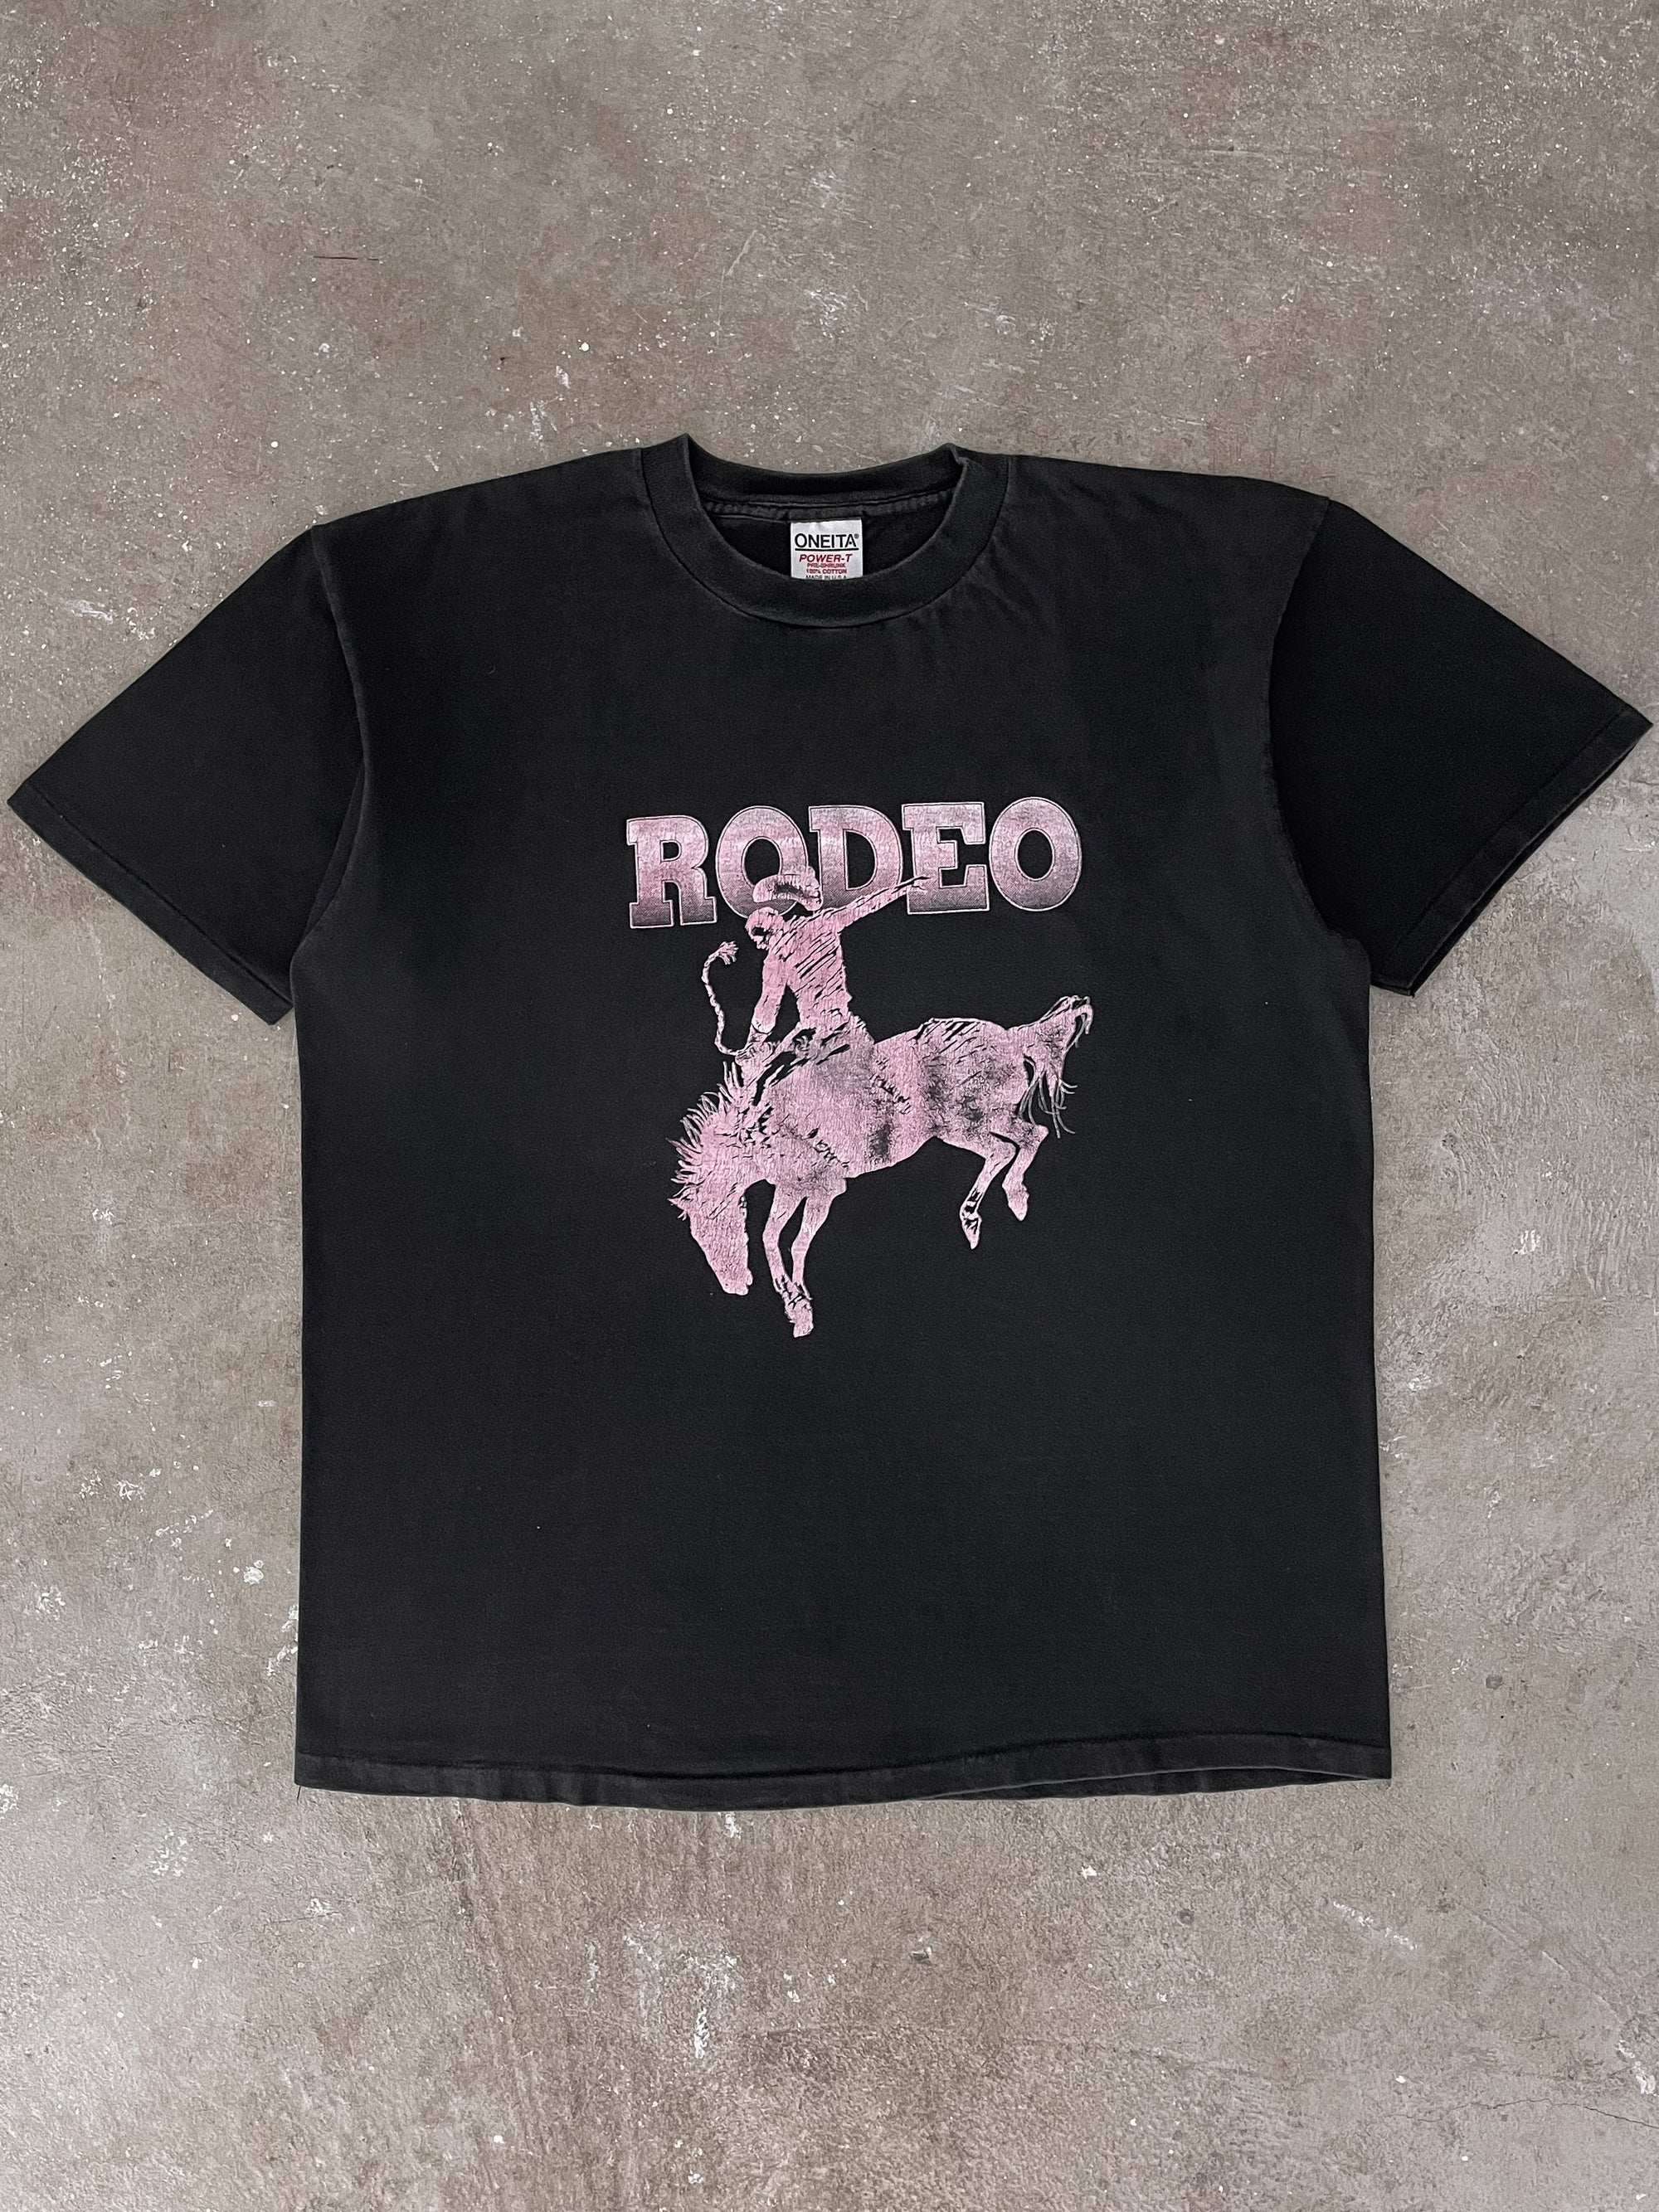 1990s “Rodeo” Single Stitched Tee (XL)